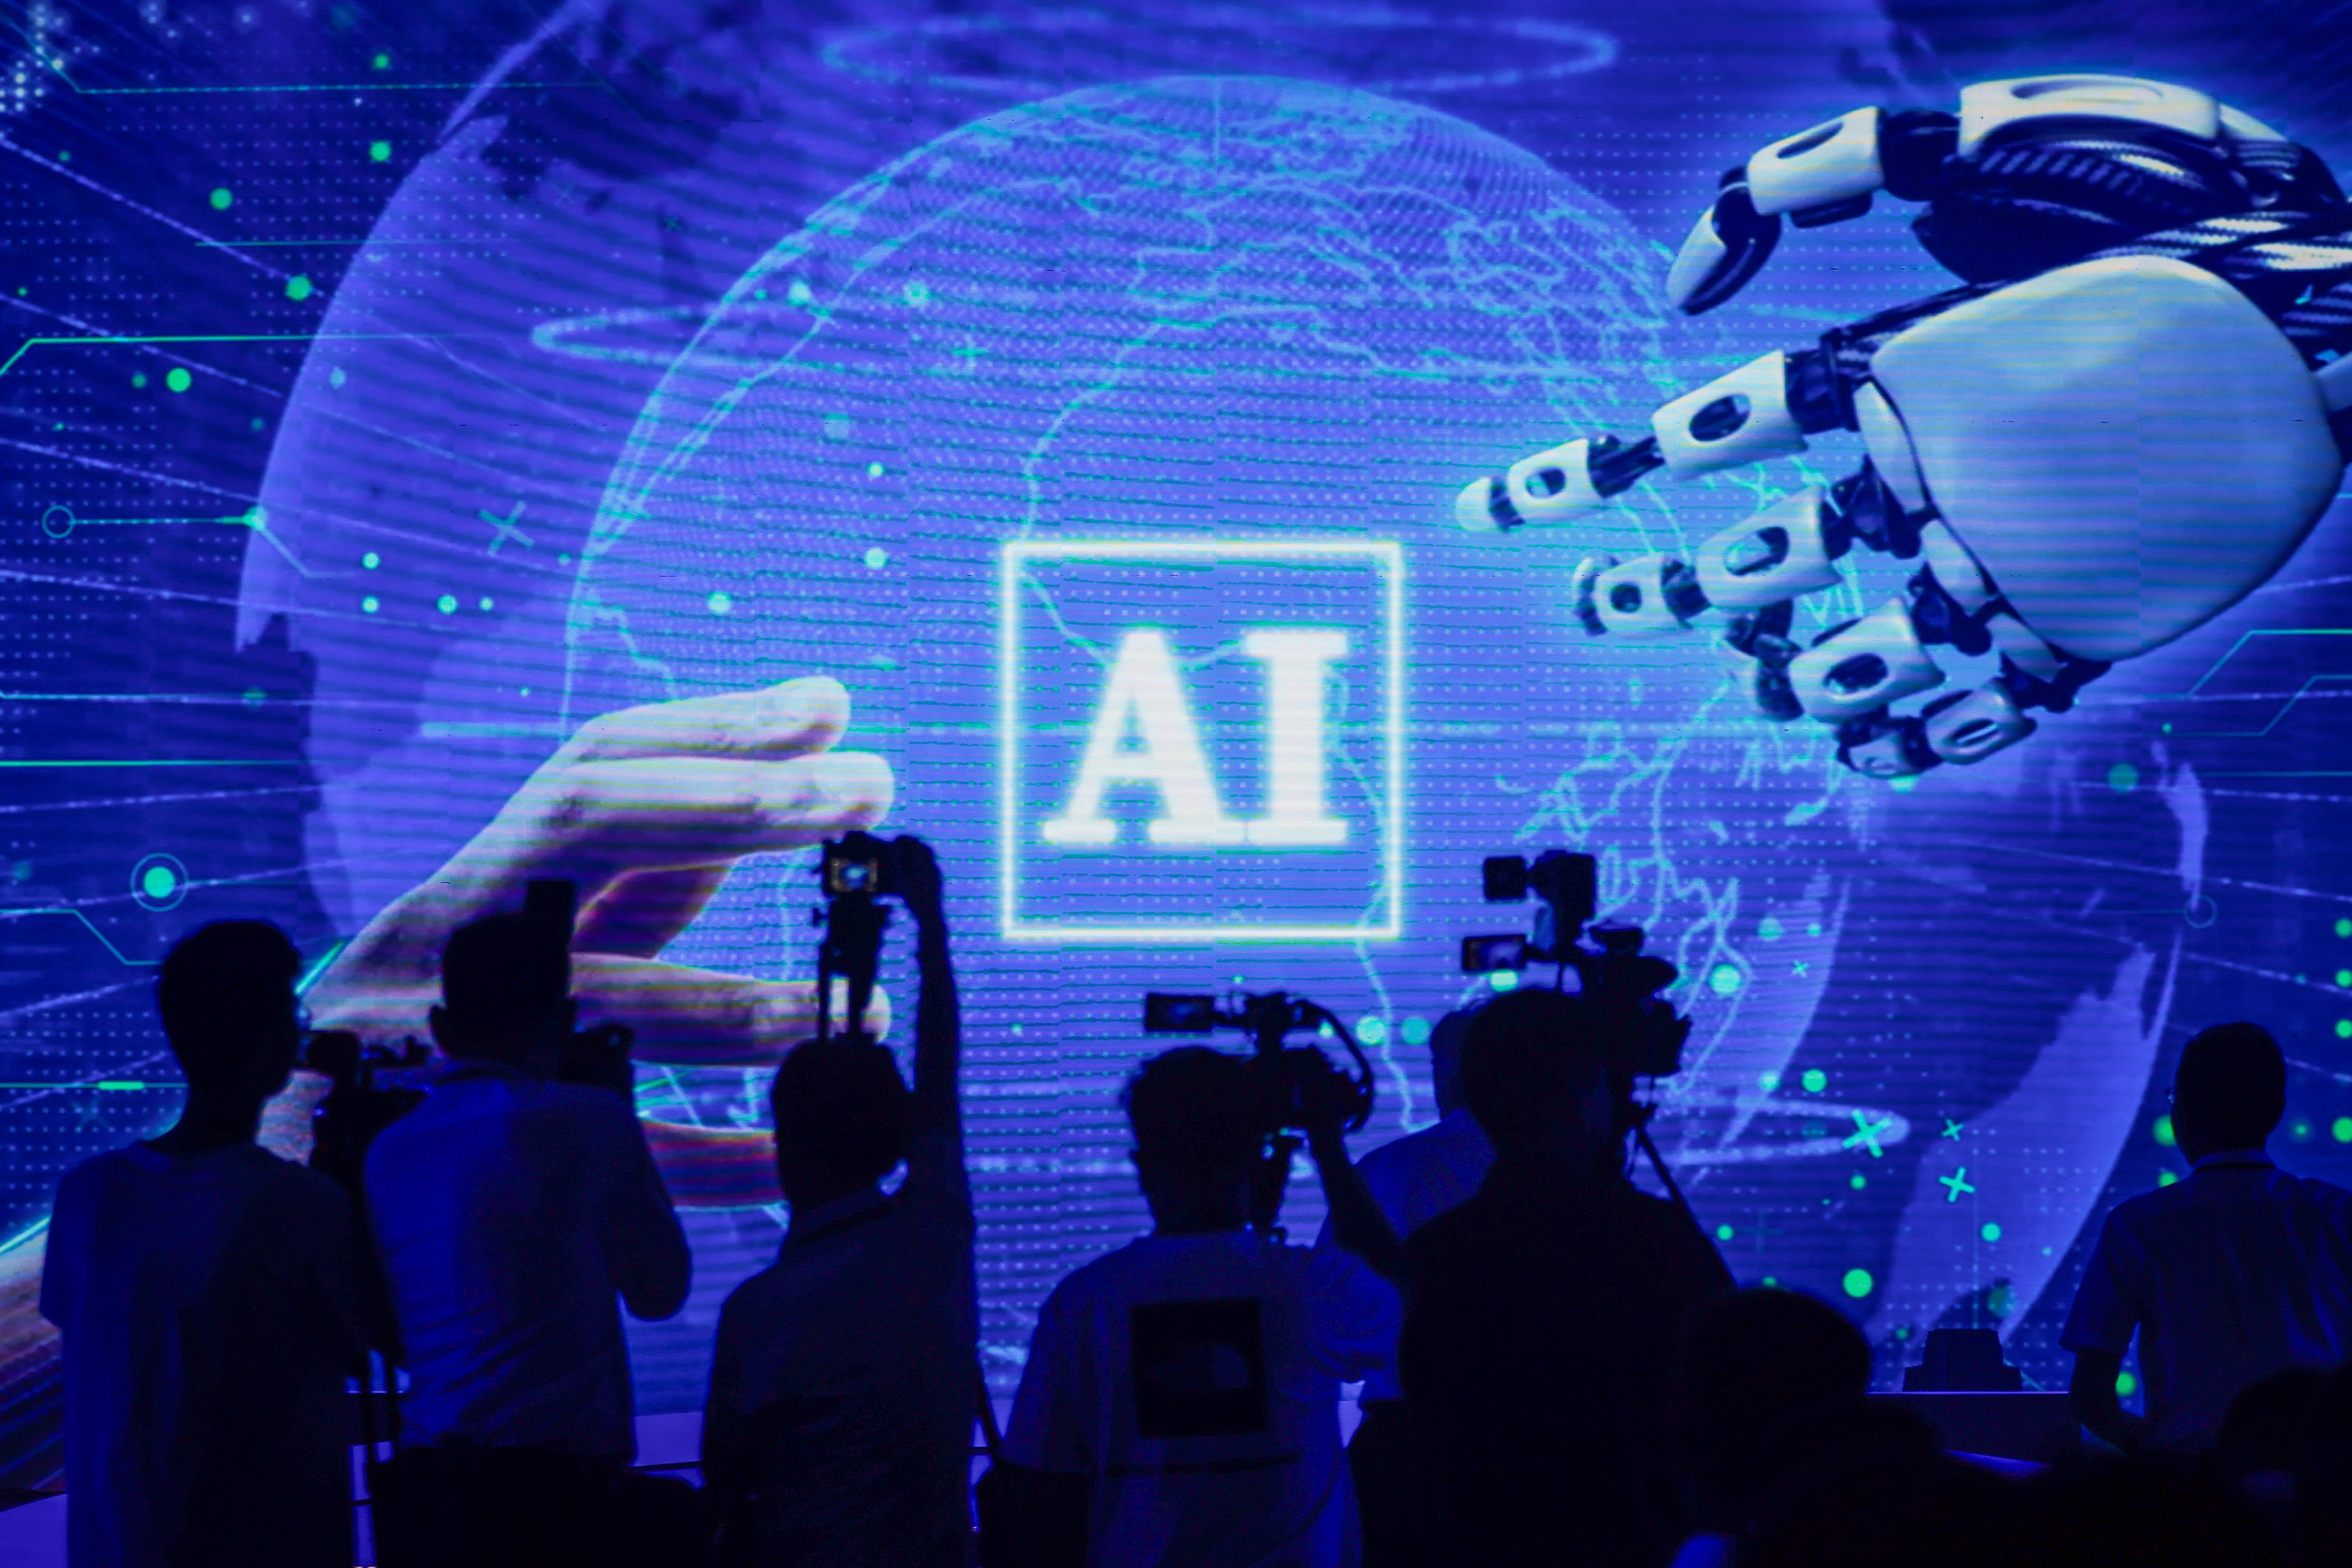 Officials from China and the US are expected to discuss the emerging risks of AI when they meet in Geneva on Tuesday. Photo: EPA-EFE